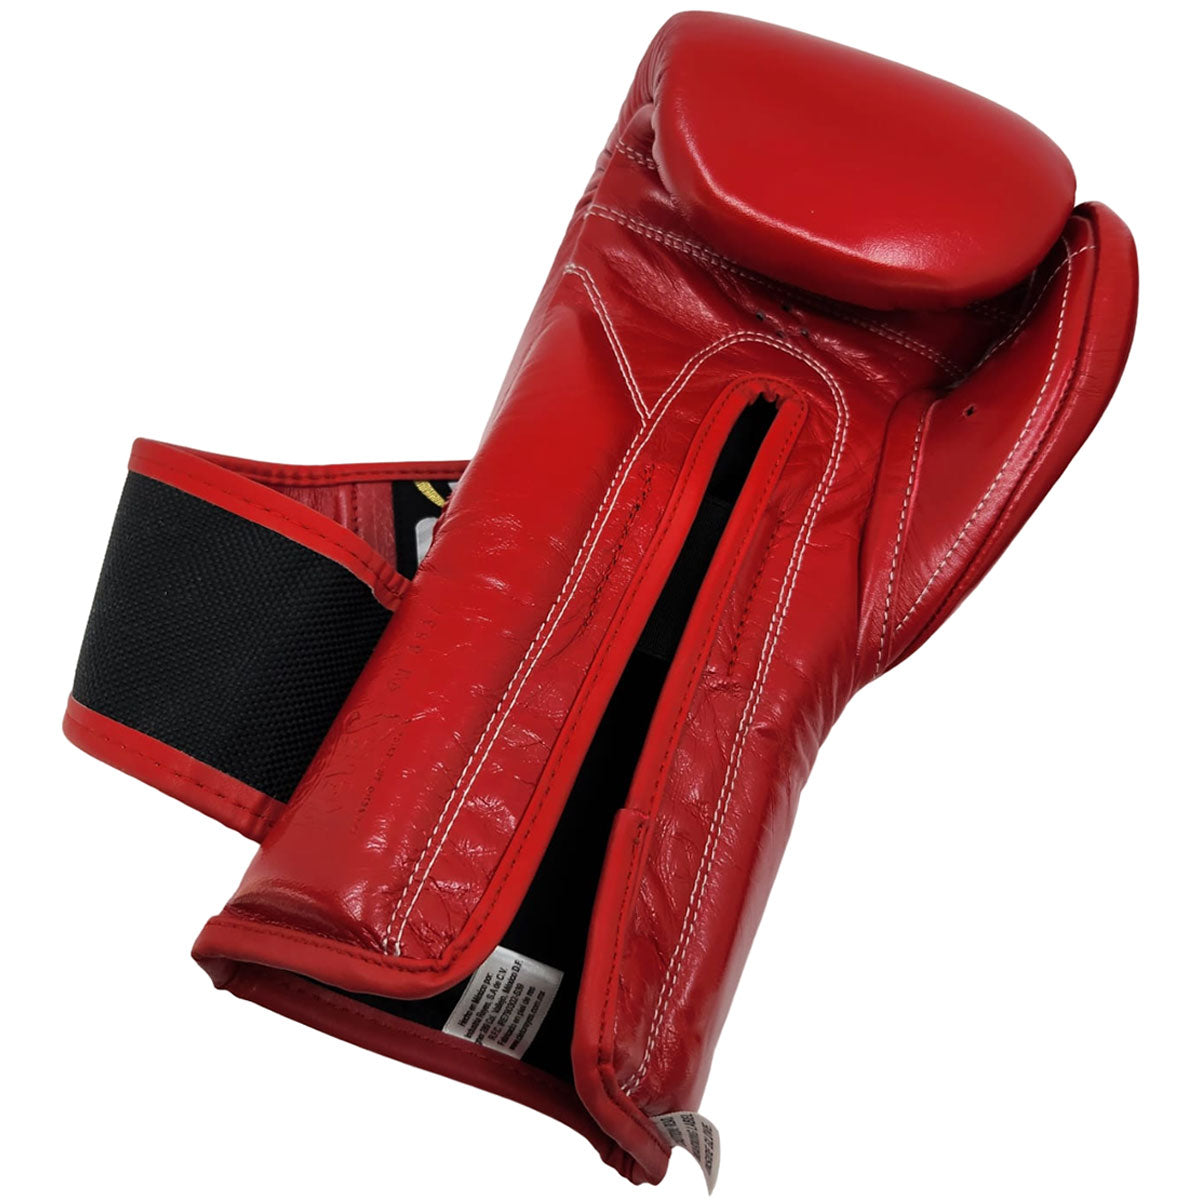 Boxing Gloves Cleto Reyes Hook Loop Closure Red (Free Shipping)